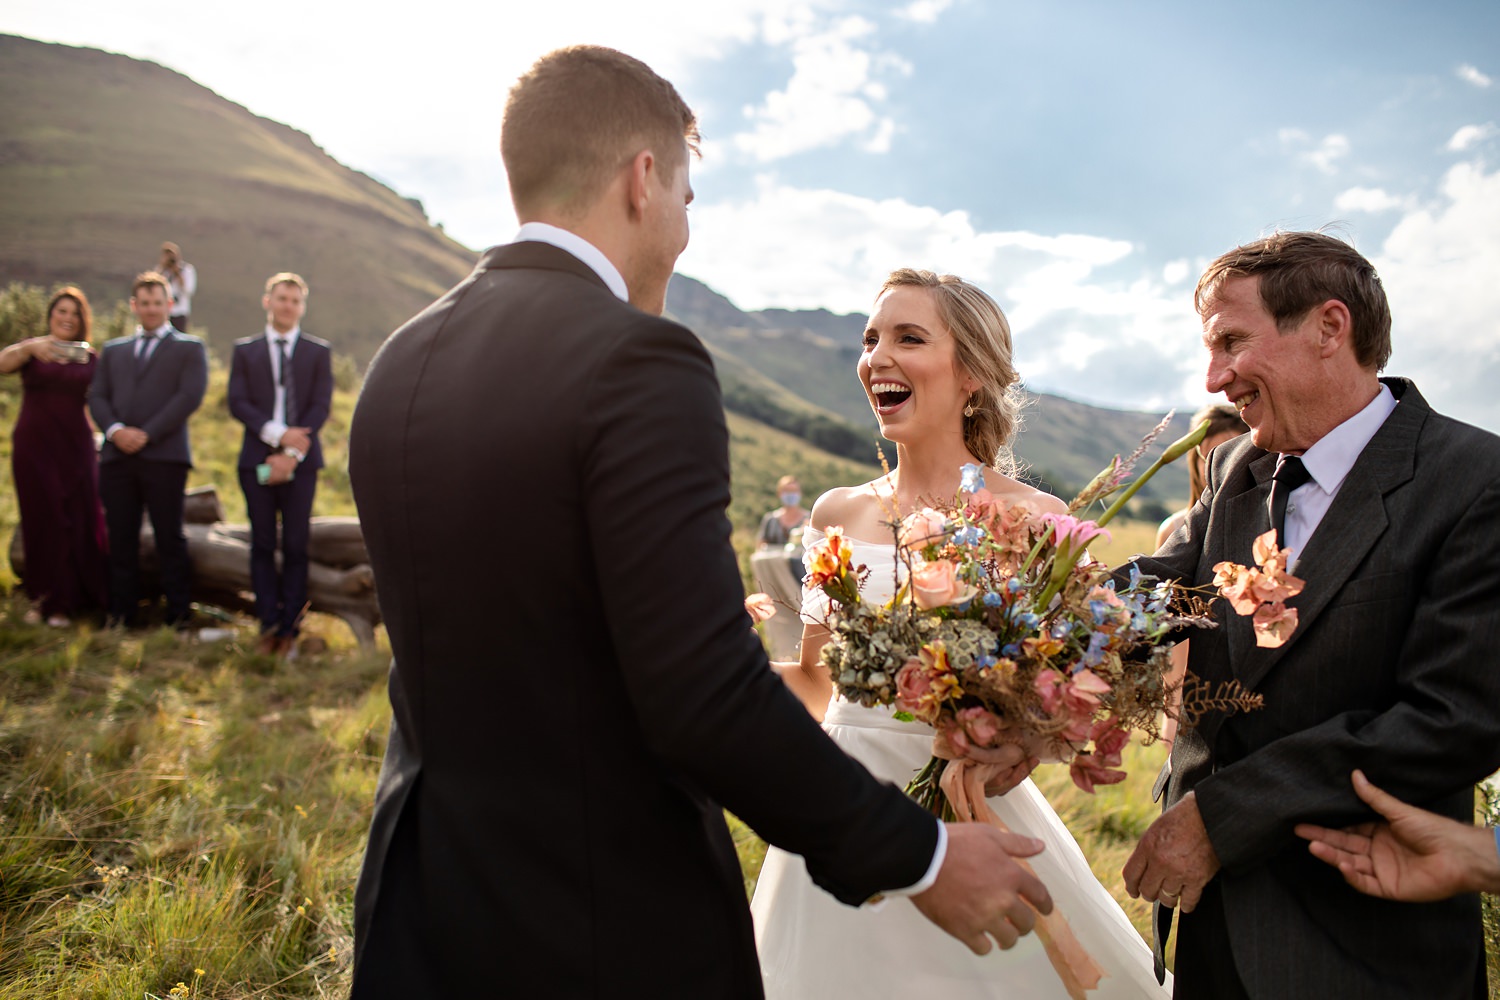 A bride laughs with delight as she sees the groom at their mountain top Southern Drakensberg wedding ceremony.